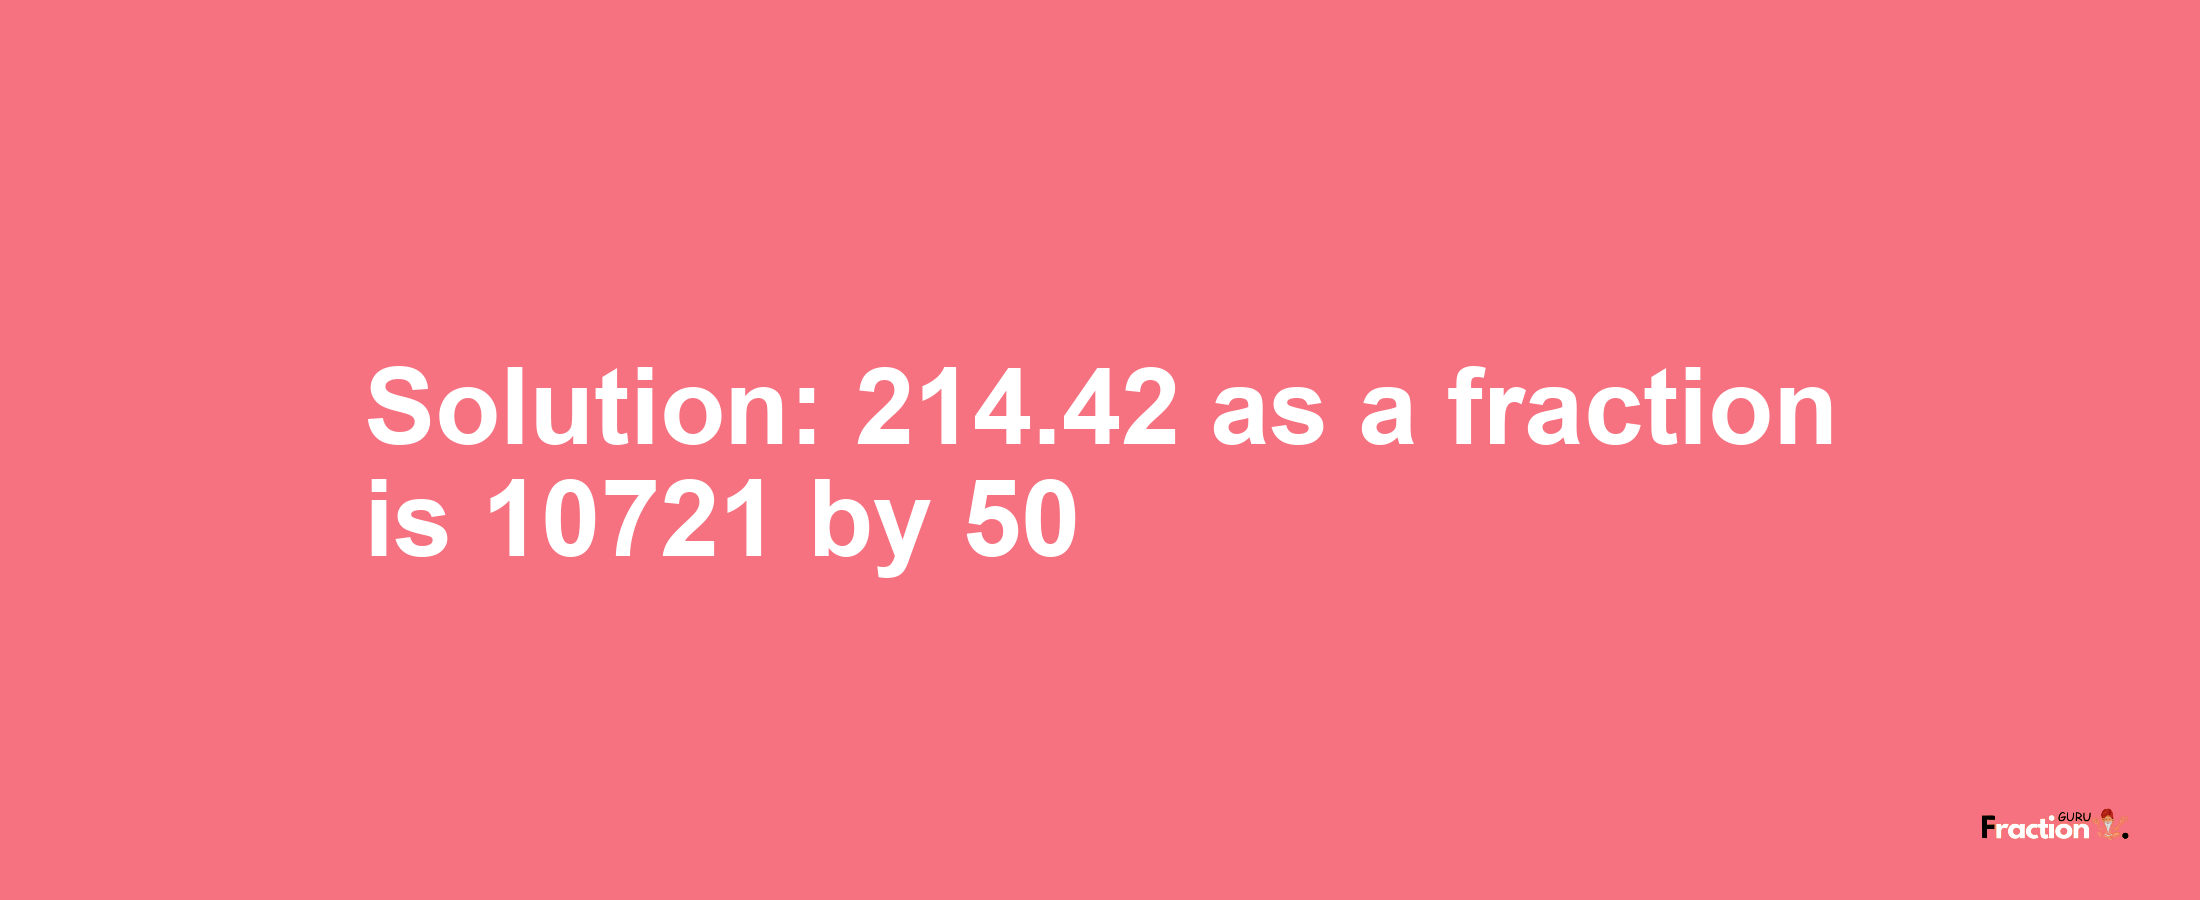 Solution:214.42 as a fraction is 10721/50